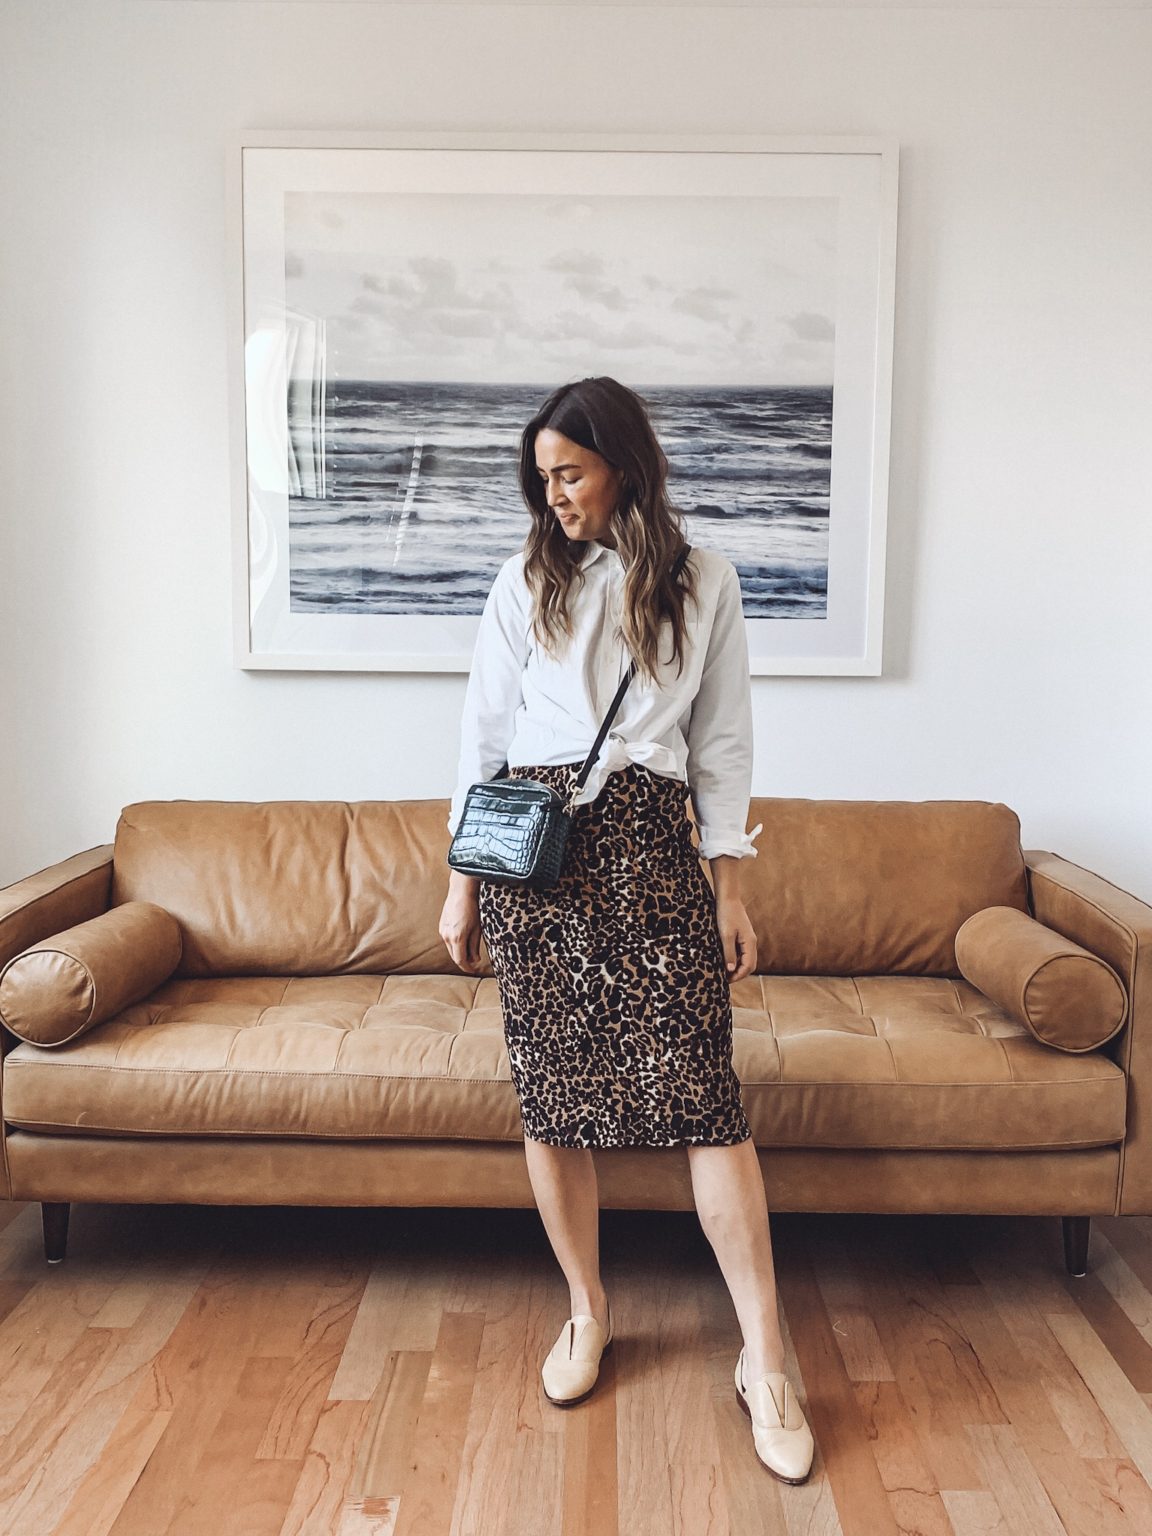 9 Sonnet James Looks from Casual to Dressy | Natalie Borton